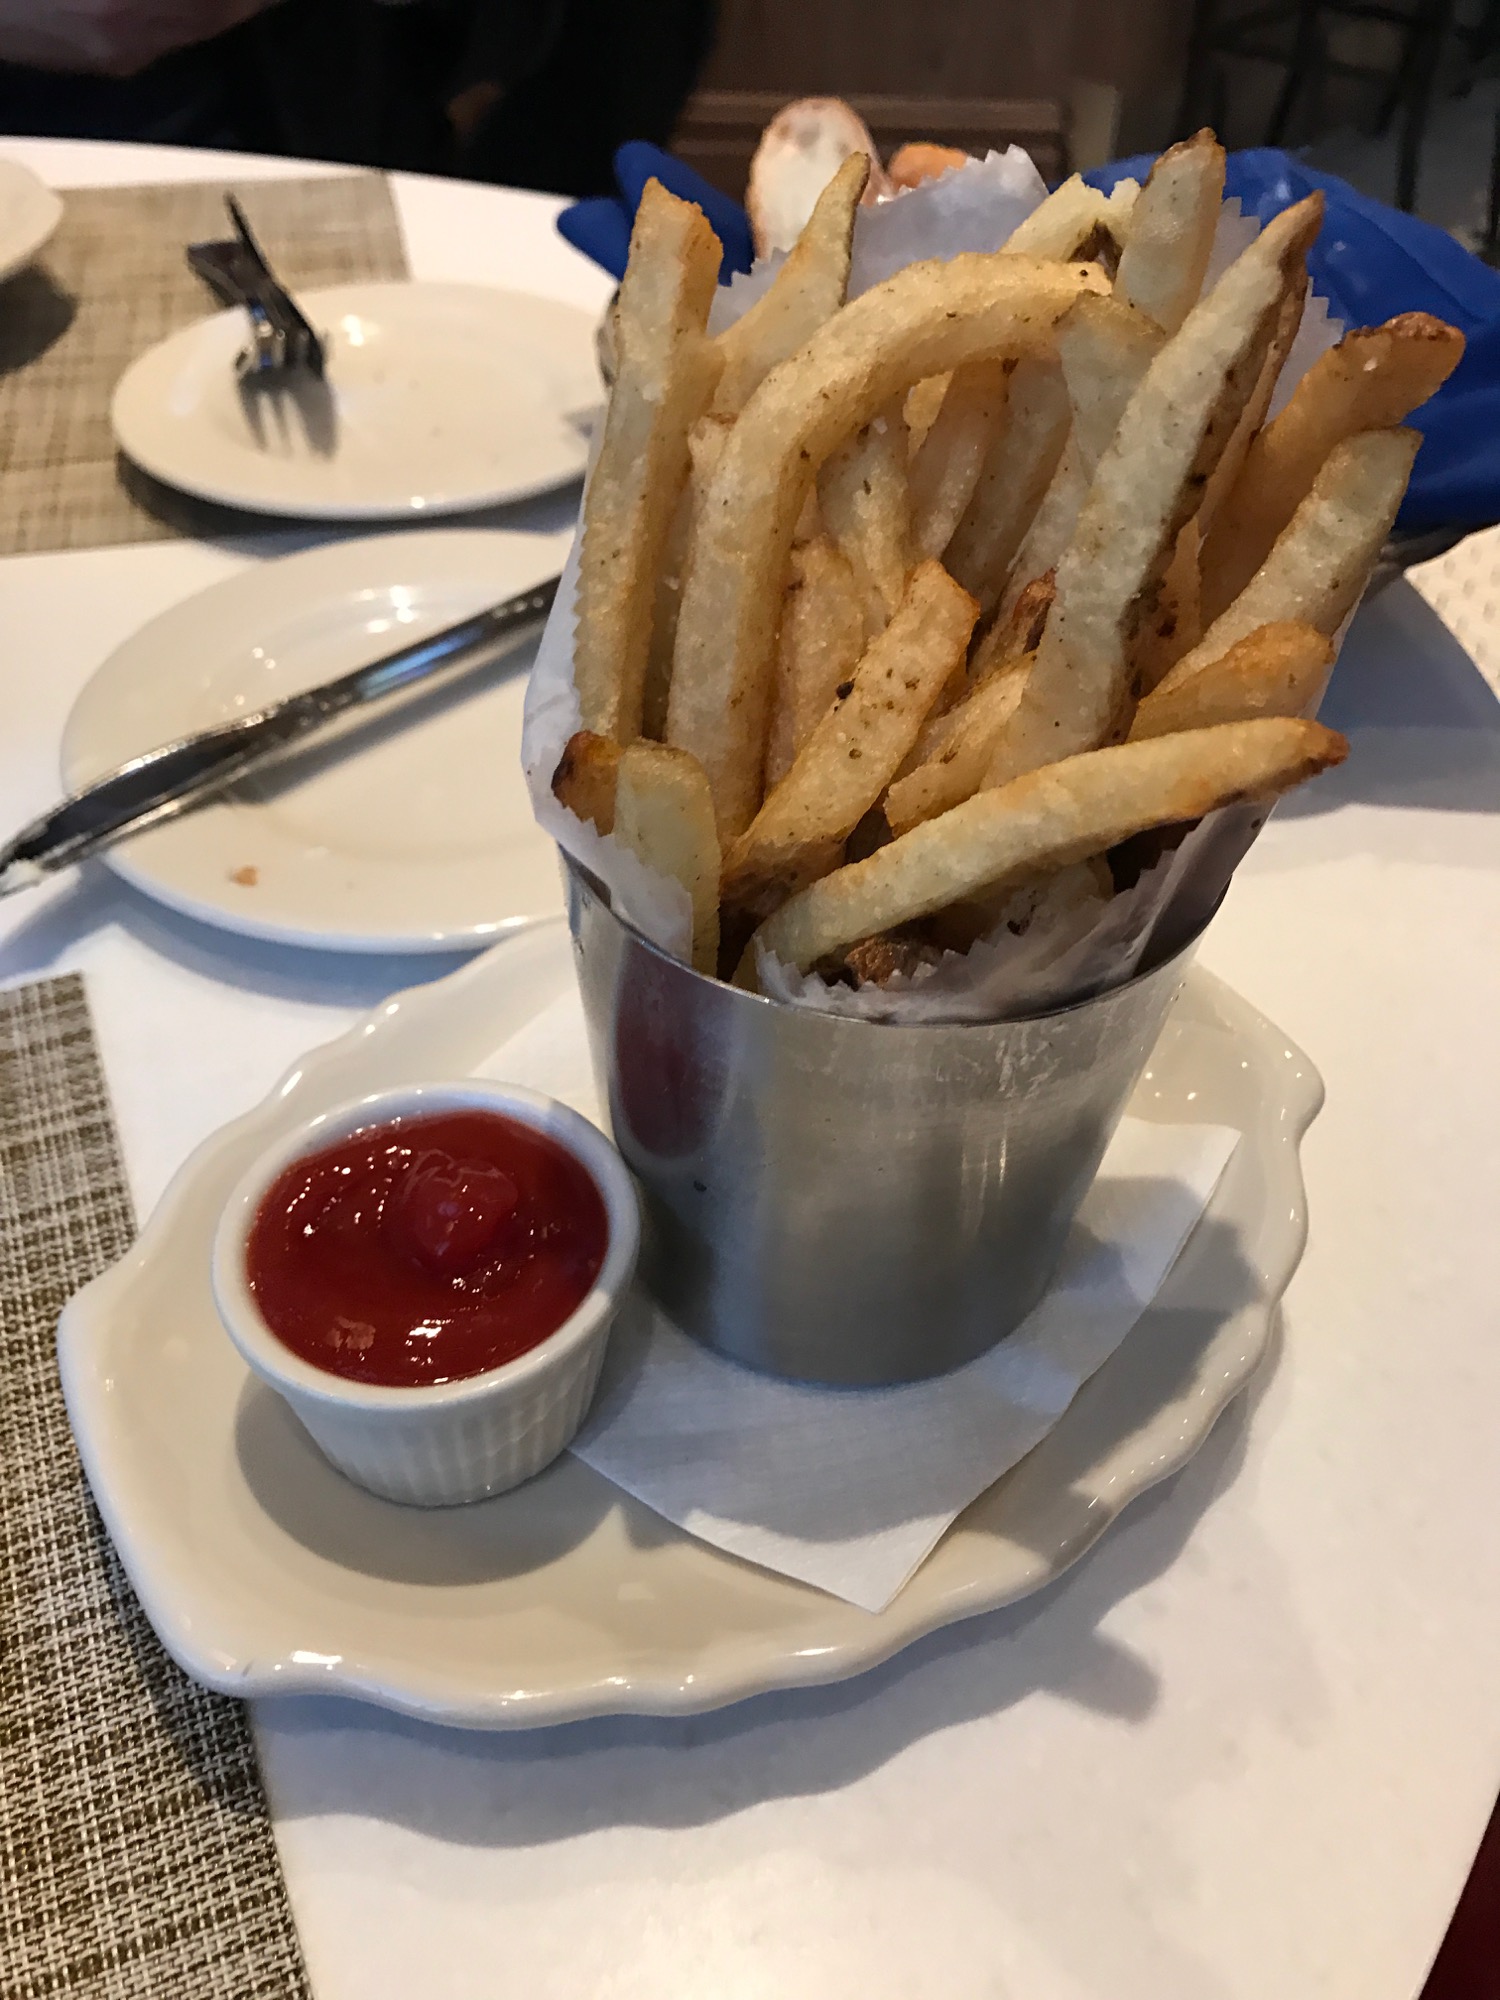 a bucket of french fries with ketchup on a plate